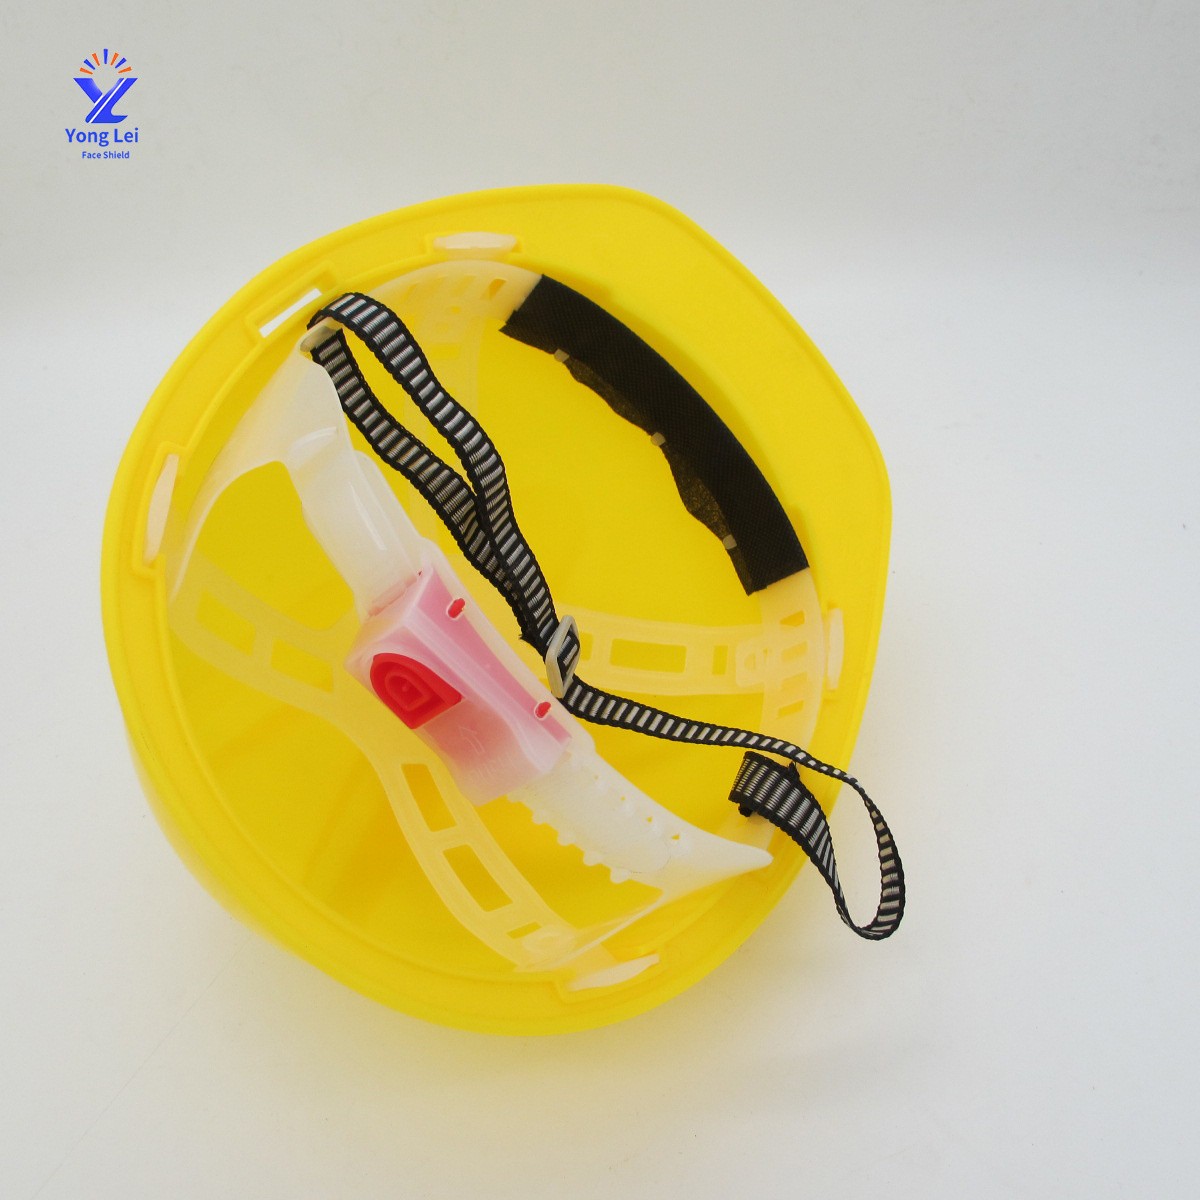 Safety Helmet with Full Brim Helmet, Suitable for Quick Disassembly on Construction Site